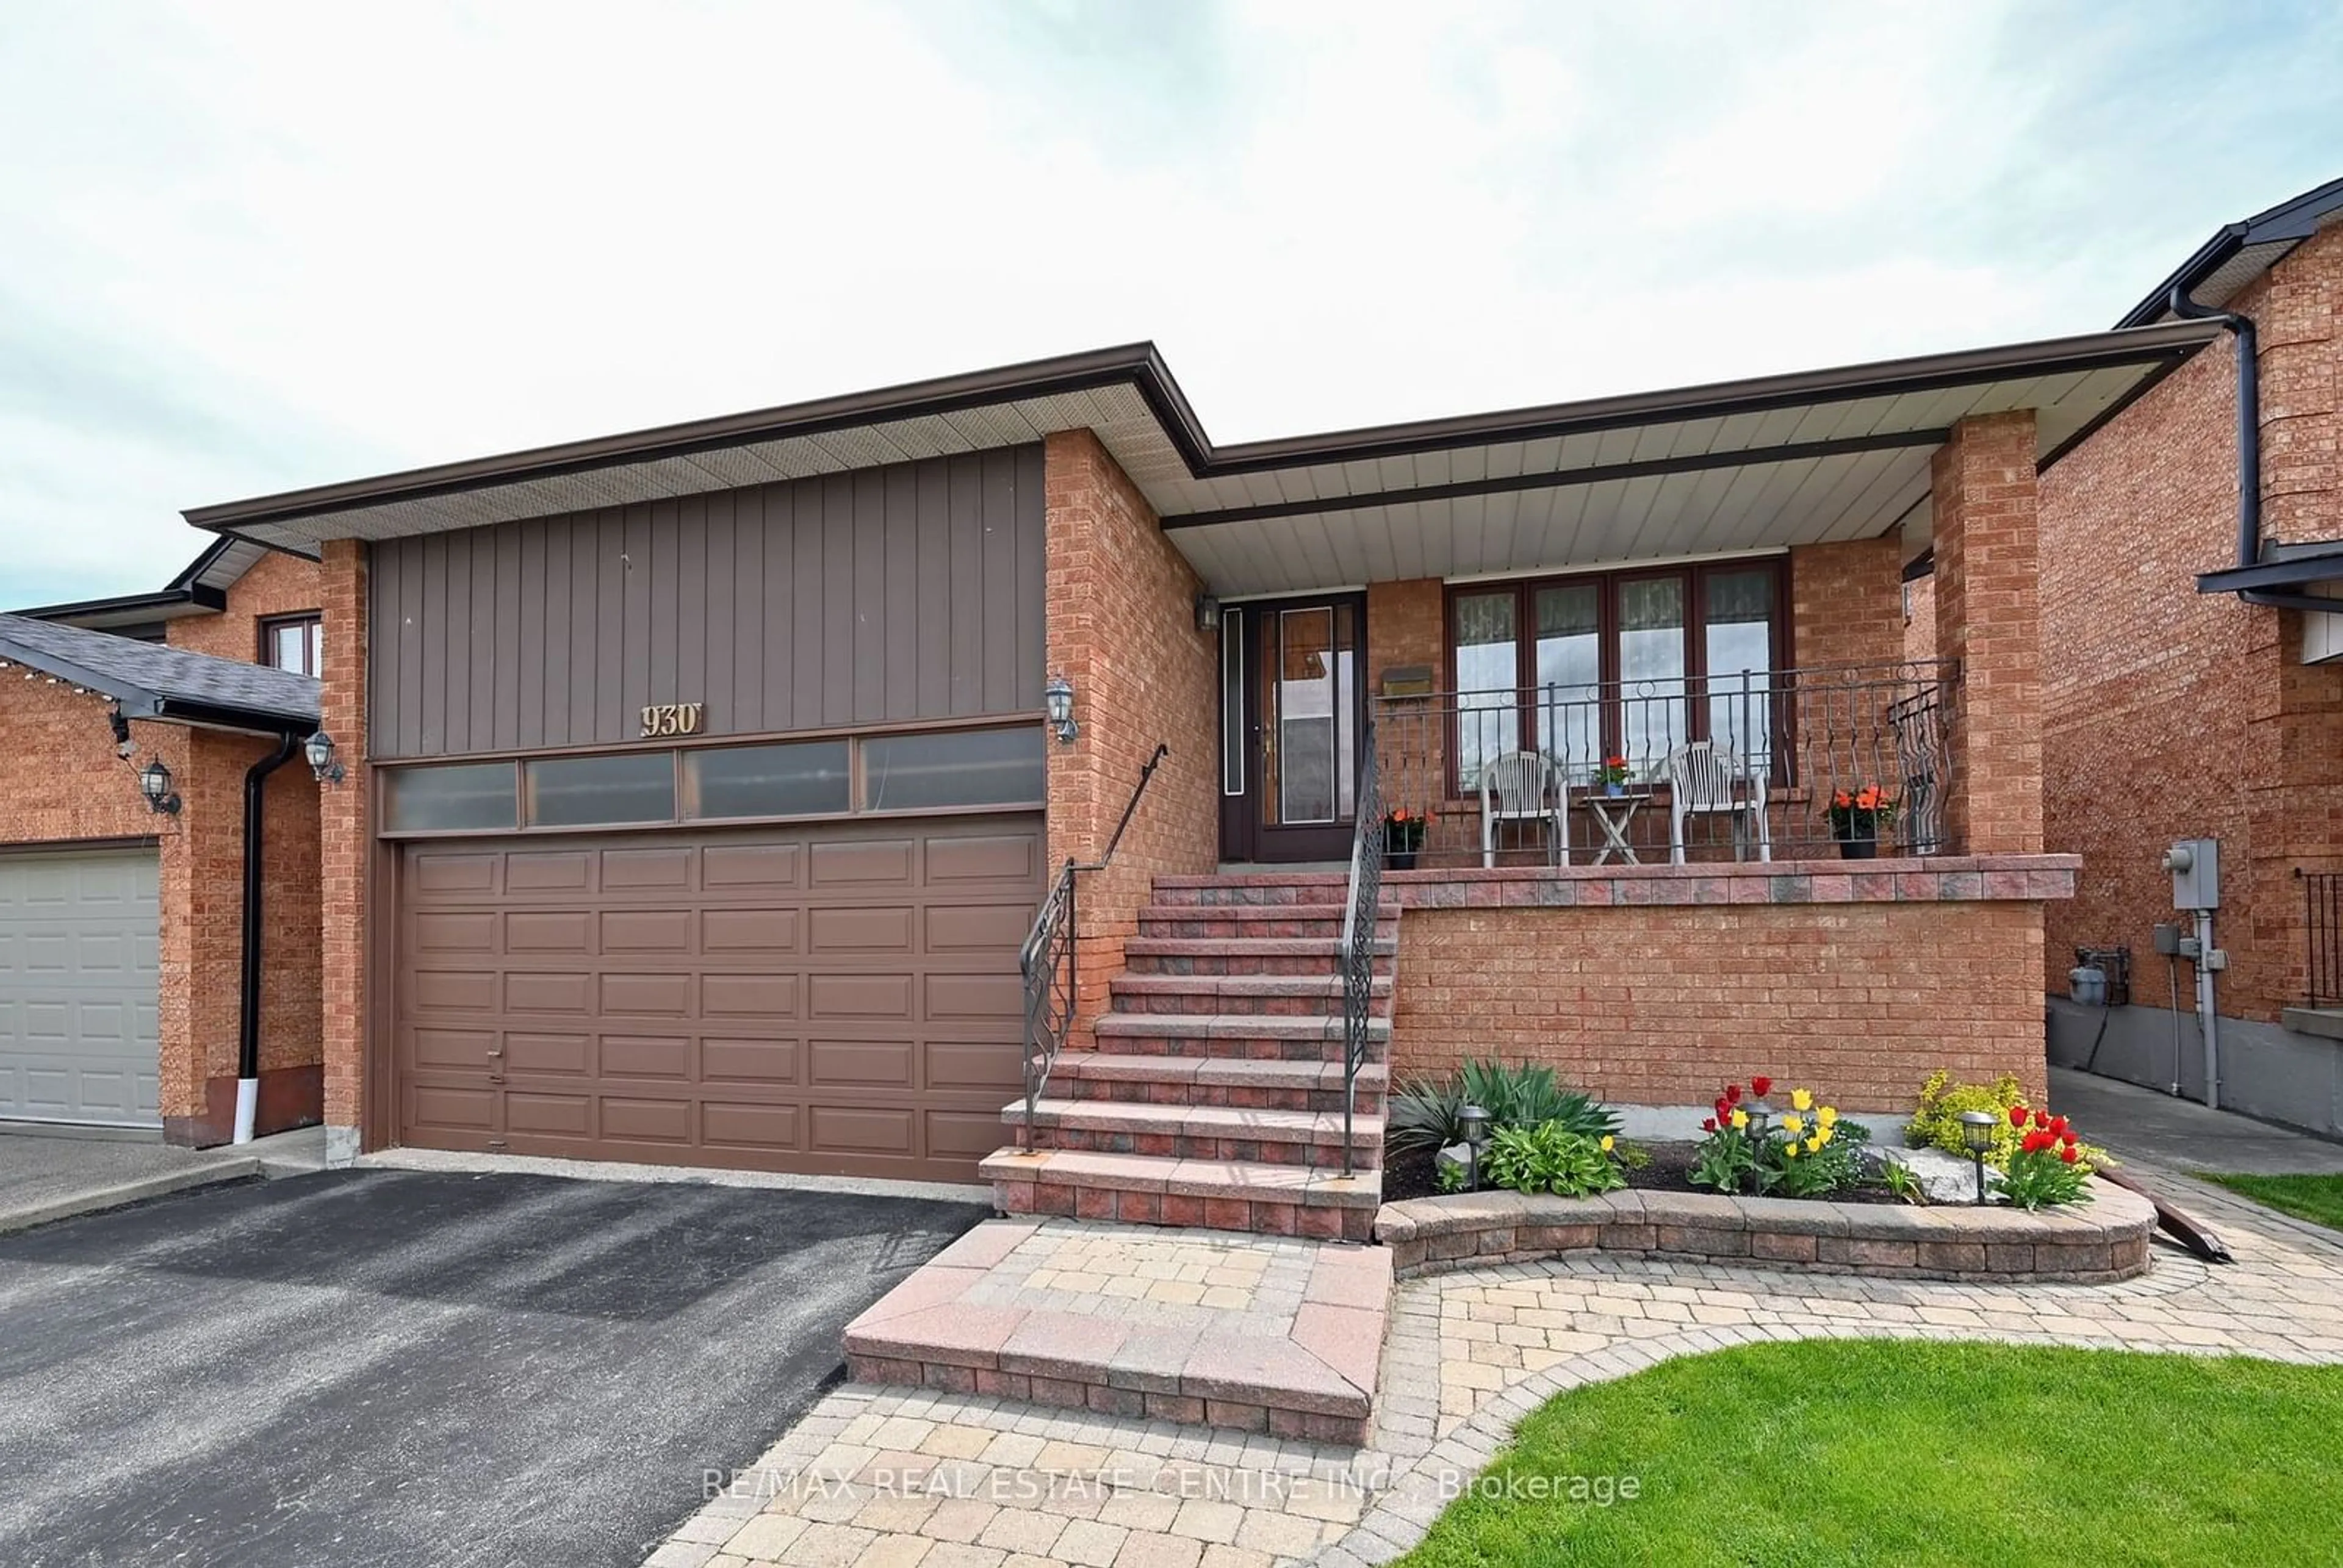 Home with brick exterior material for 930 Wetherby Lane, Mississauga Ontario L4W 4S7